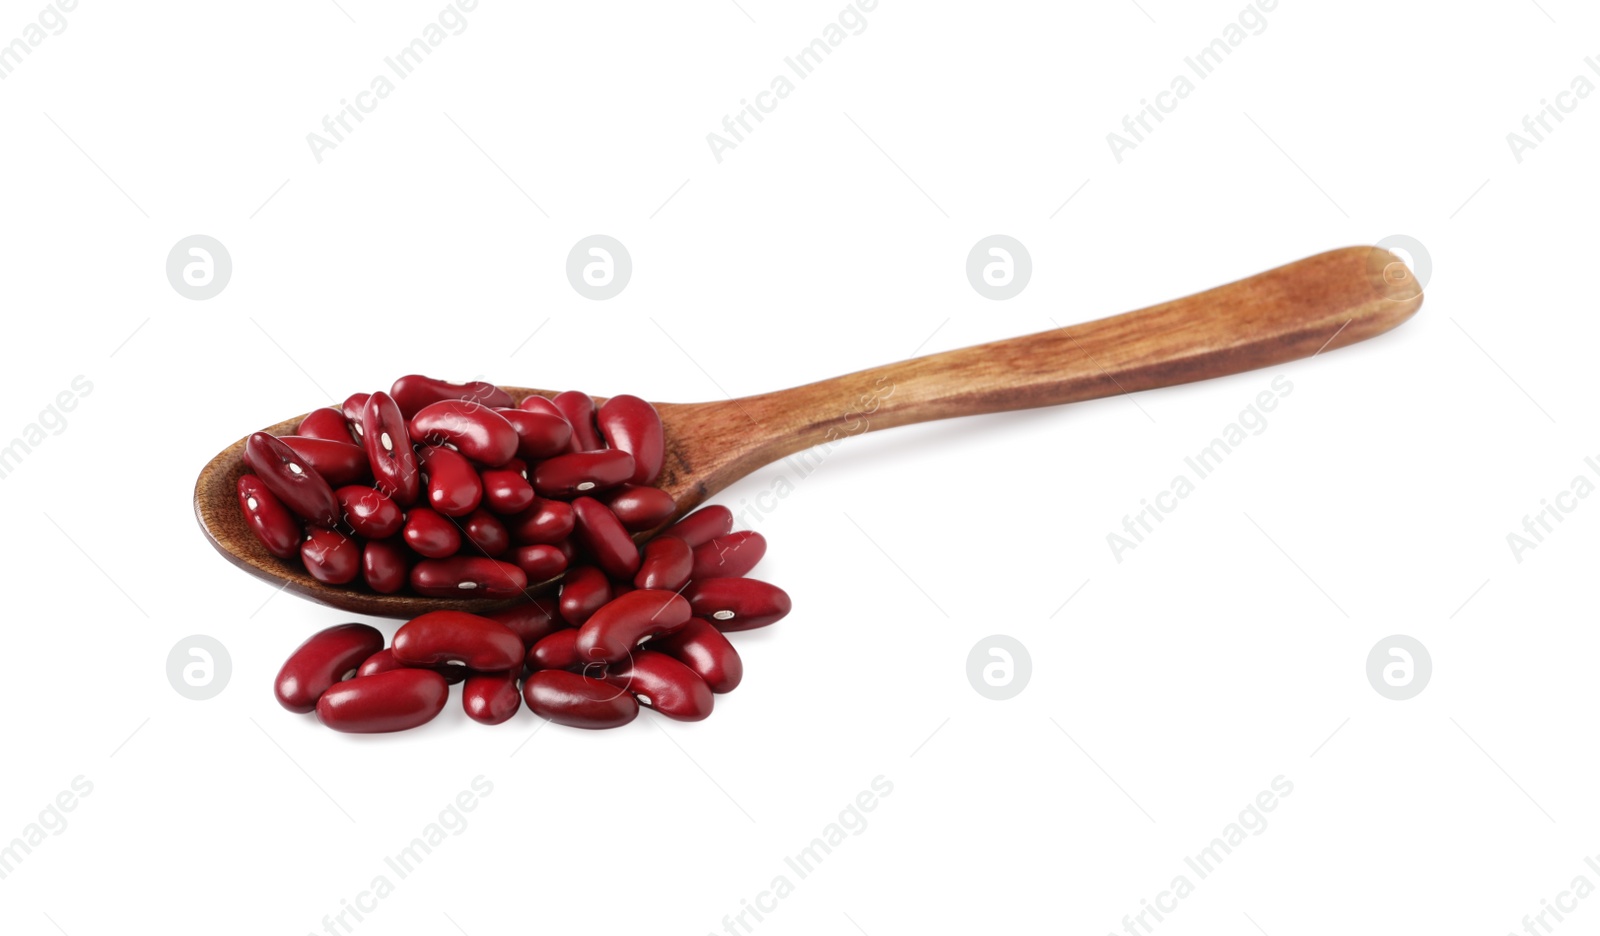 Photo of Raw red kidney beans with wooden spoon isolated on white